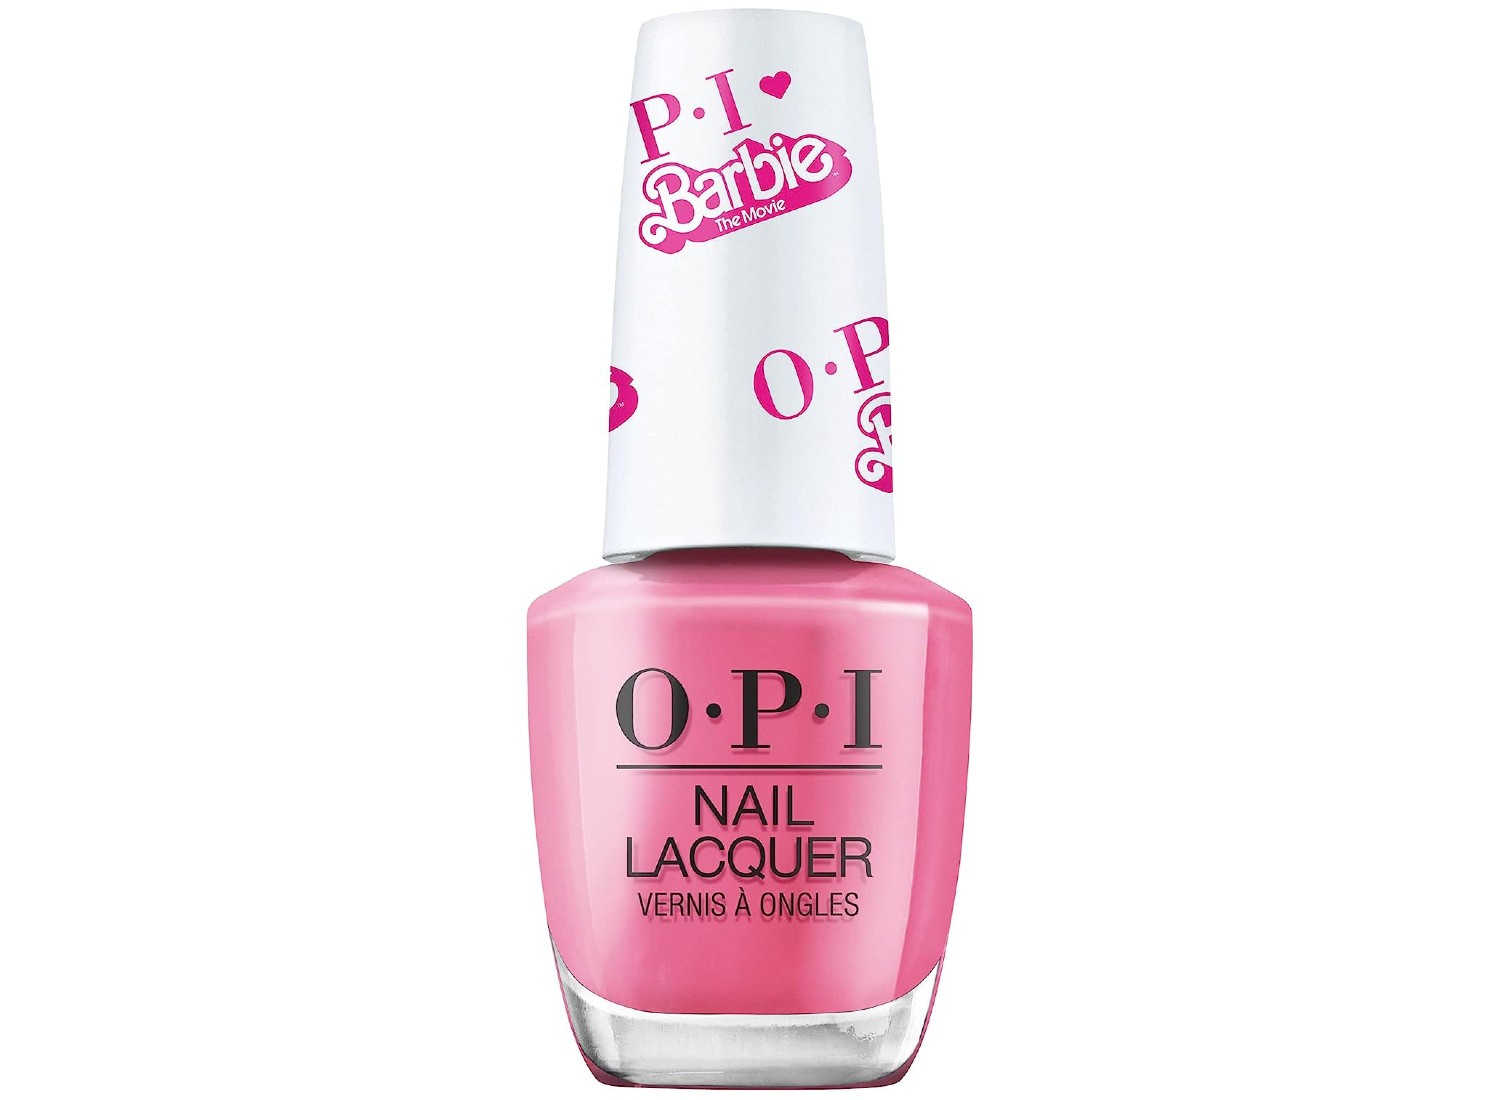 Our Favorite Colors From the OPI x Barbie Nail Polish Collection ...